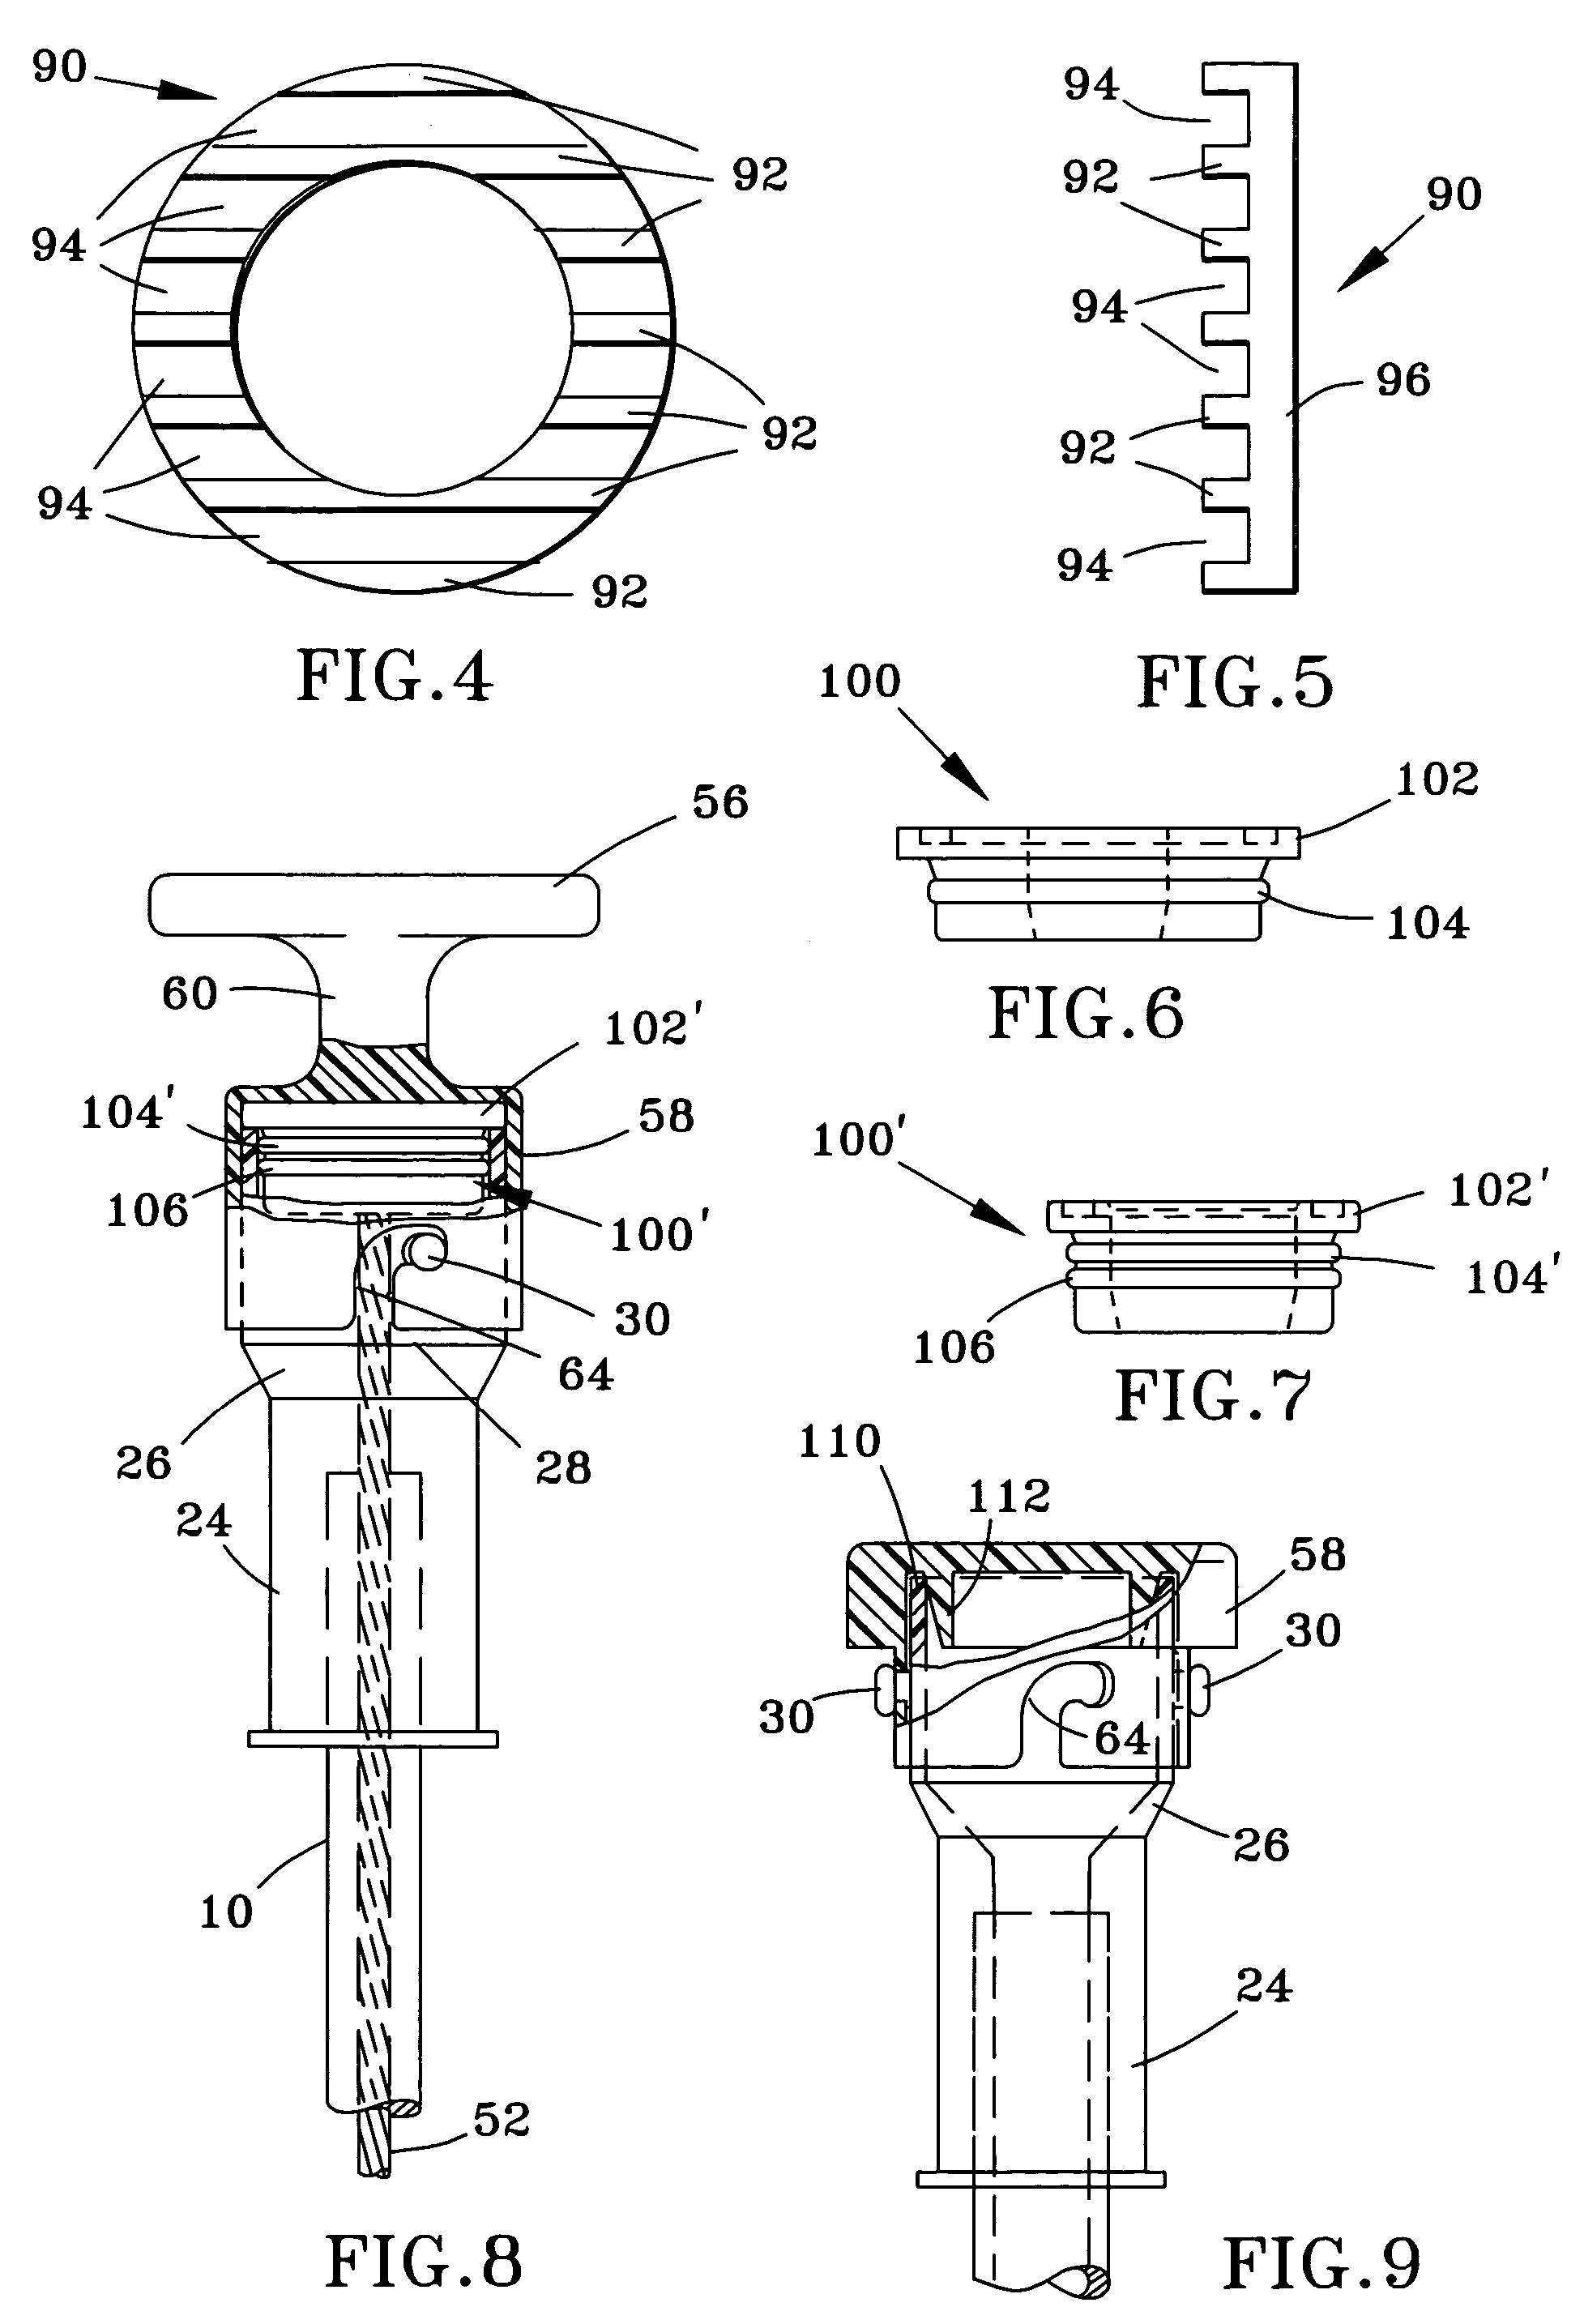 Fluid level measuring device having at least one compressible member